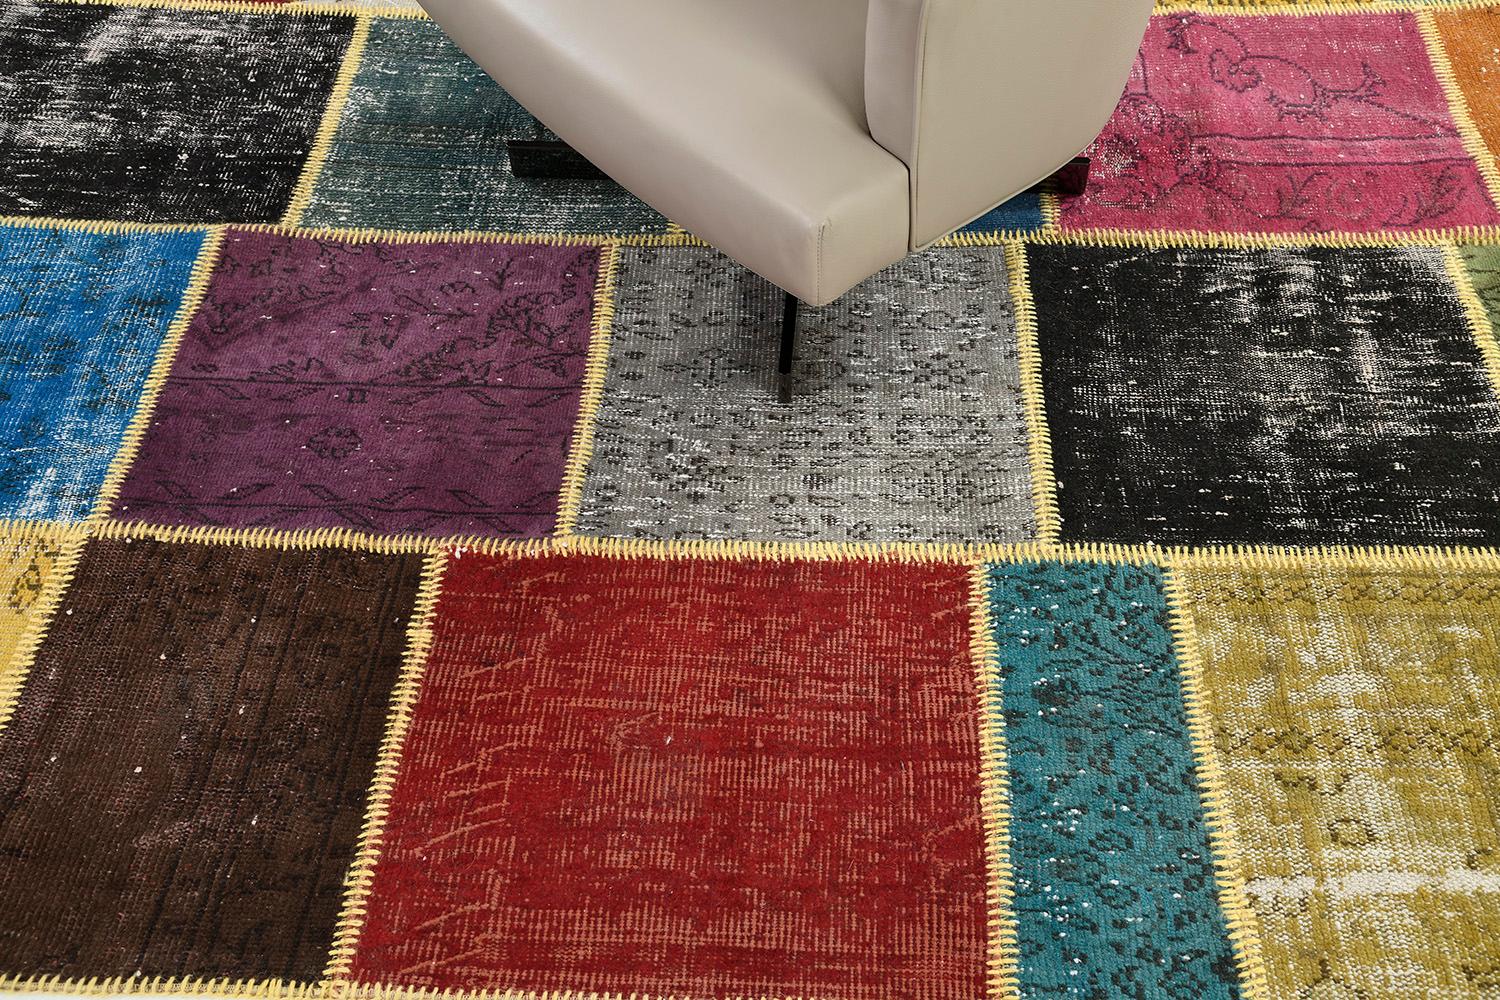 Displaying a charming and captivating appearance, this Vintage Turkish Patchwork kilim is an embodiment of modern rustic preppy style. The patchwork pattern is composed of intricately designed variegated irregular squares and rectangles. With its